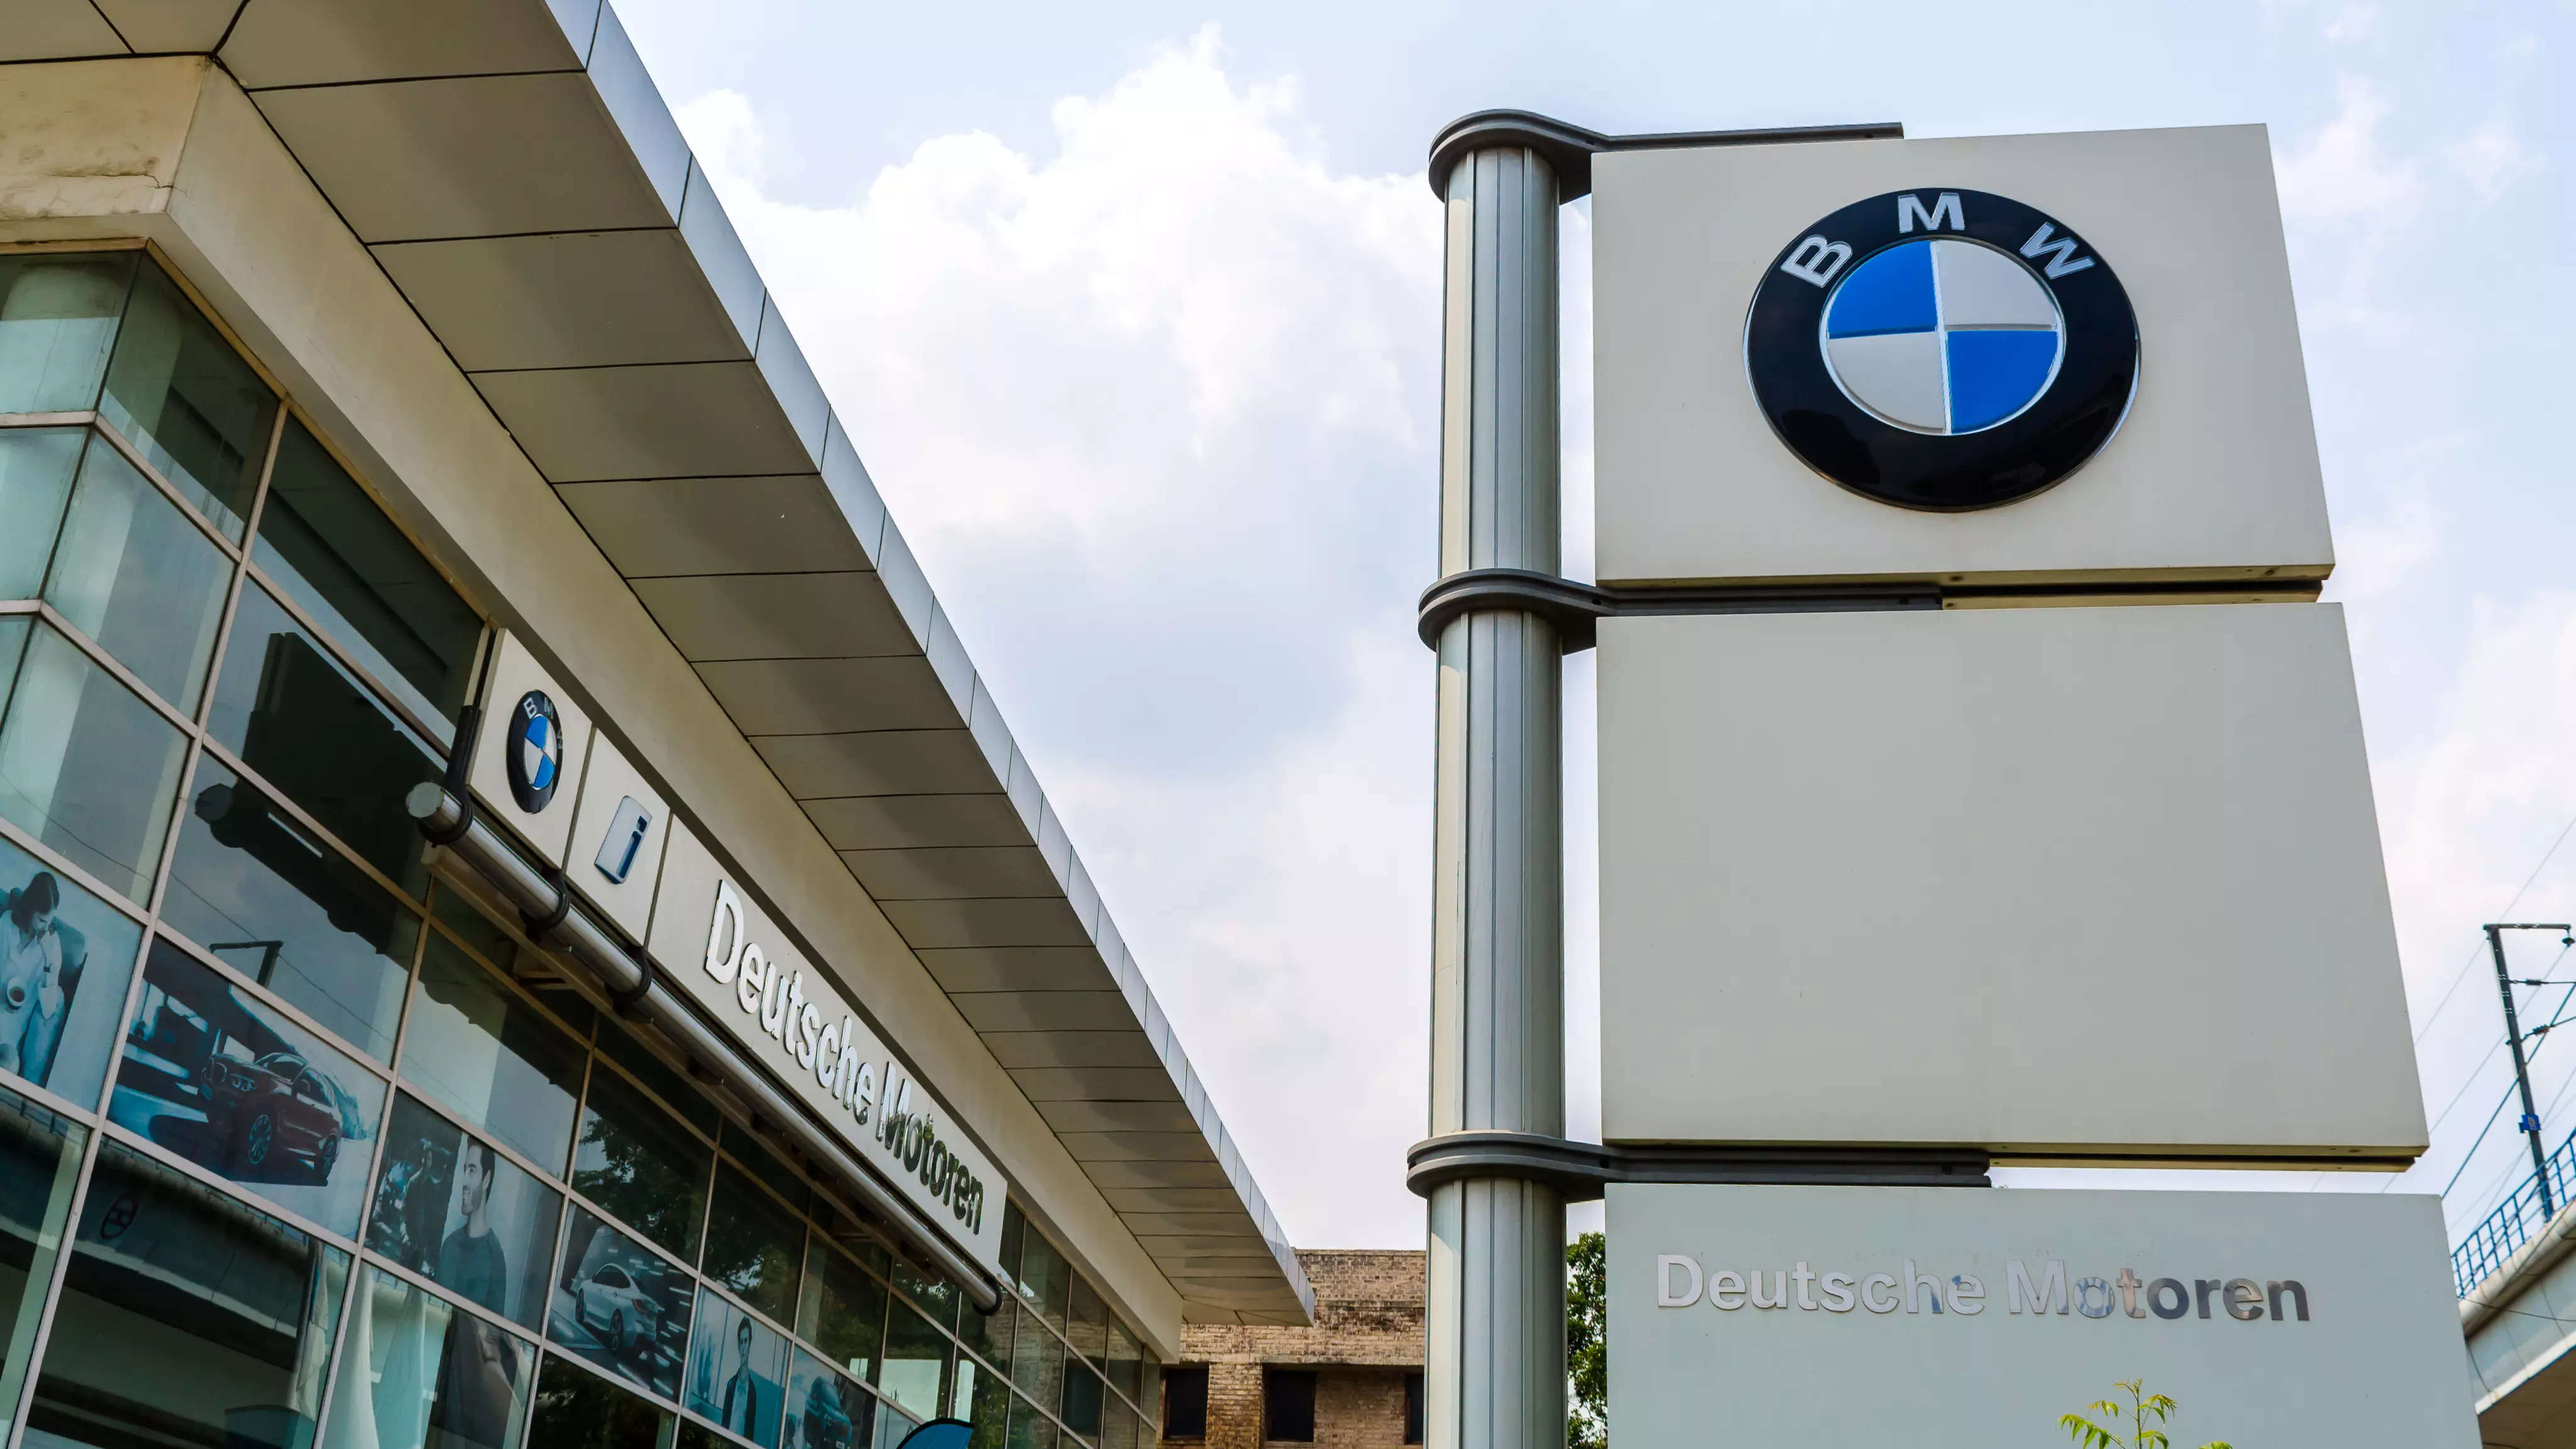 BMW sees huge growth potential in India, Auto News, ET Auto